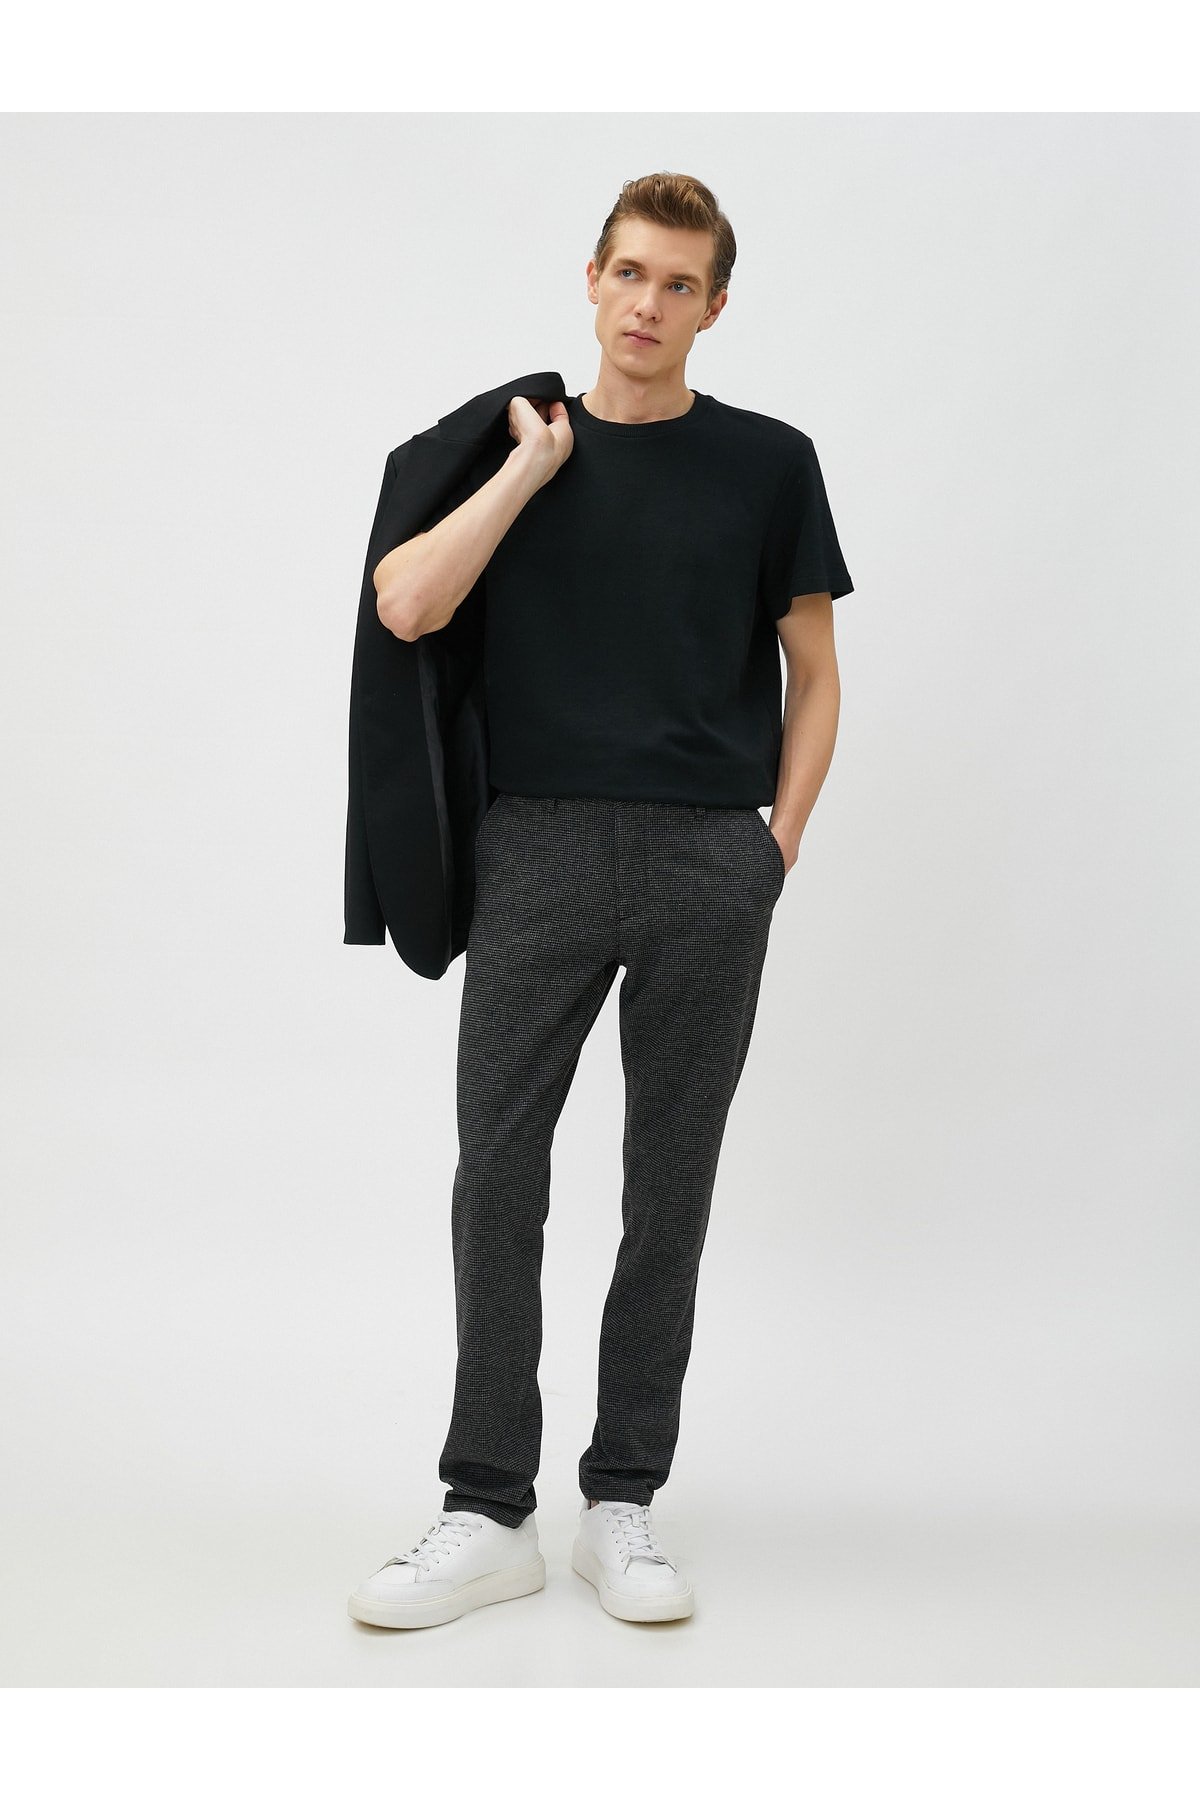 Koton Woven Trousers with Crowbarn Detailed Buttons and Pockets.